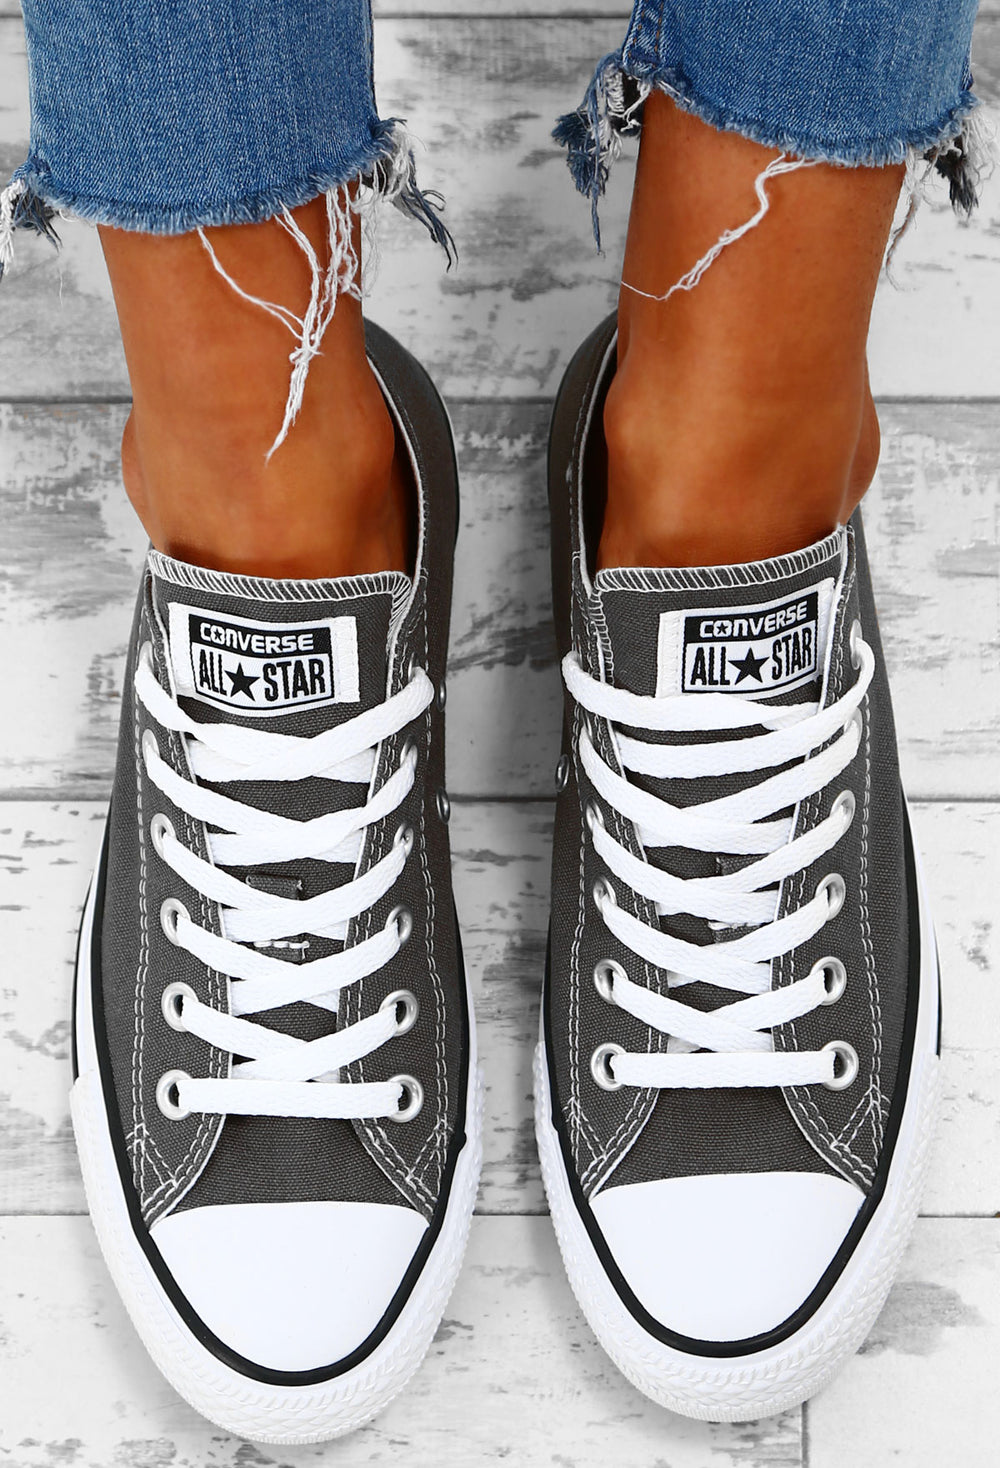 converse all star charcoal grey